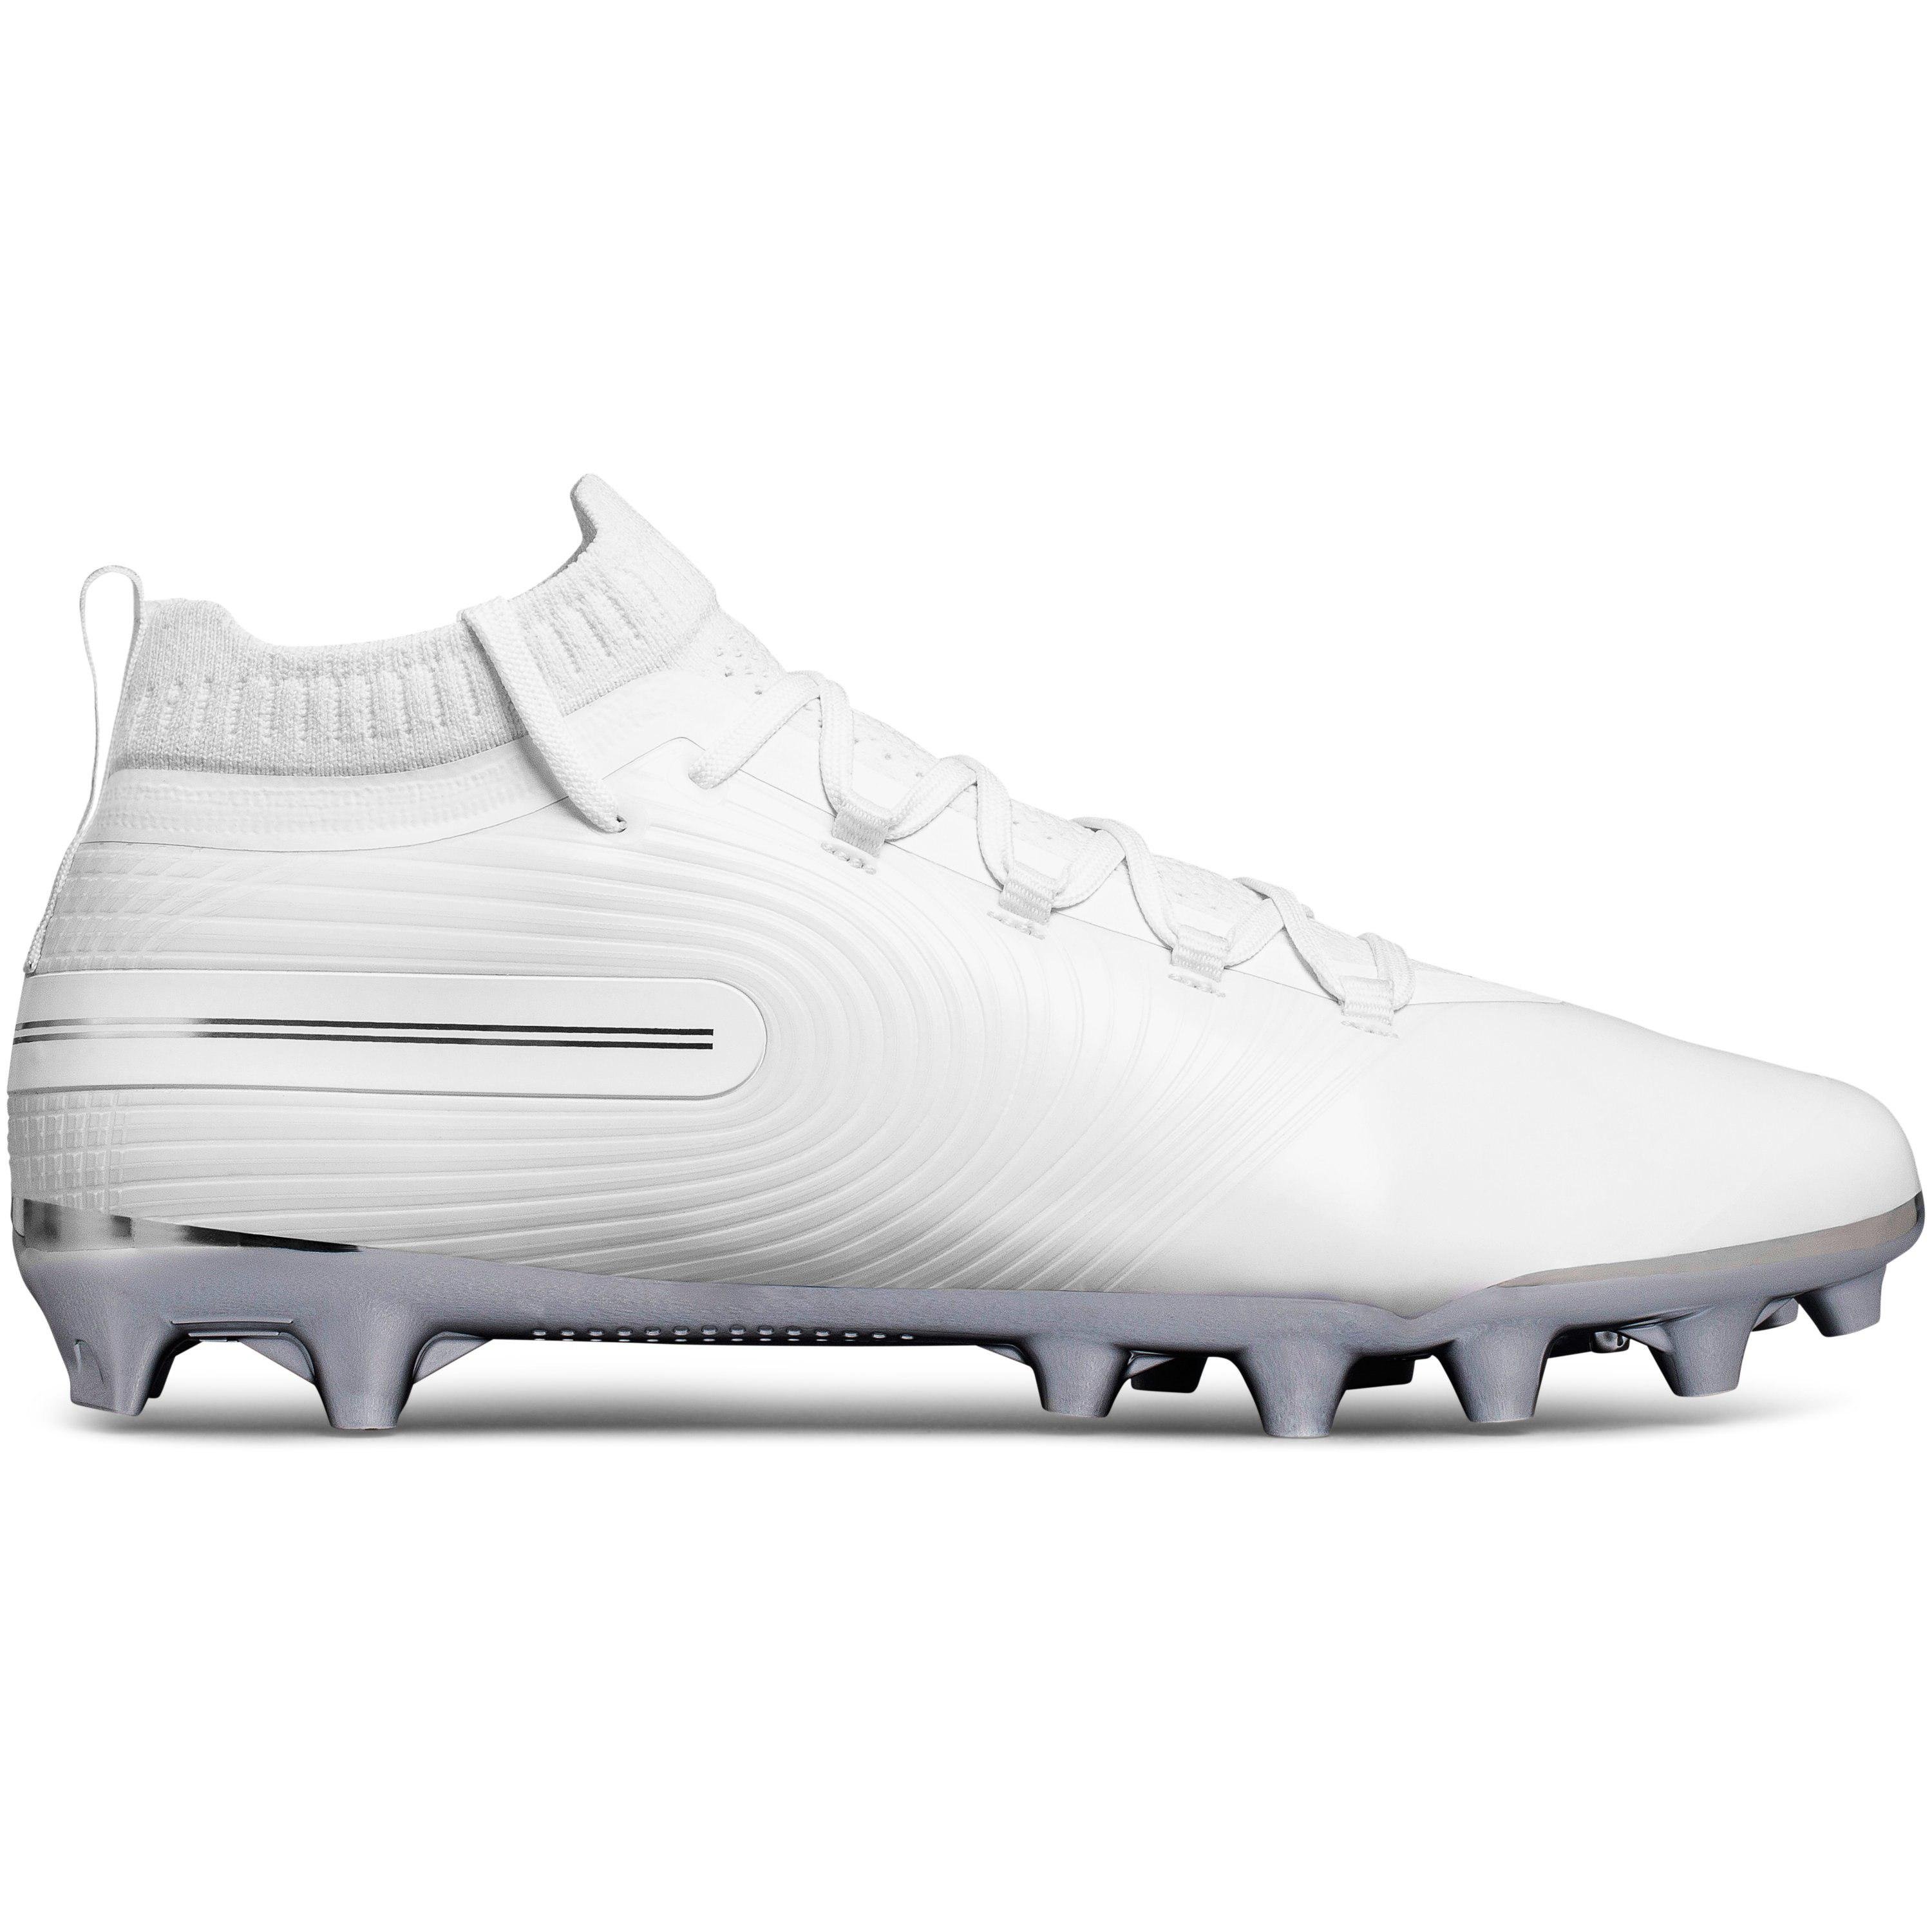 Under Armour Men's UA Highlight Football Cleats Black White 8 9 MSRP $130 NEW 